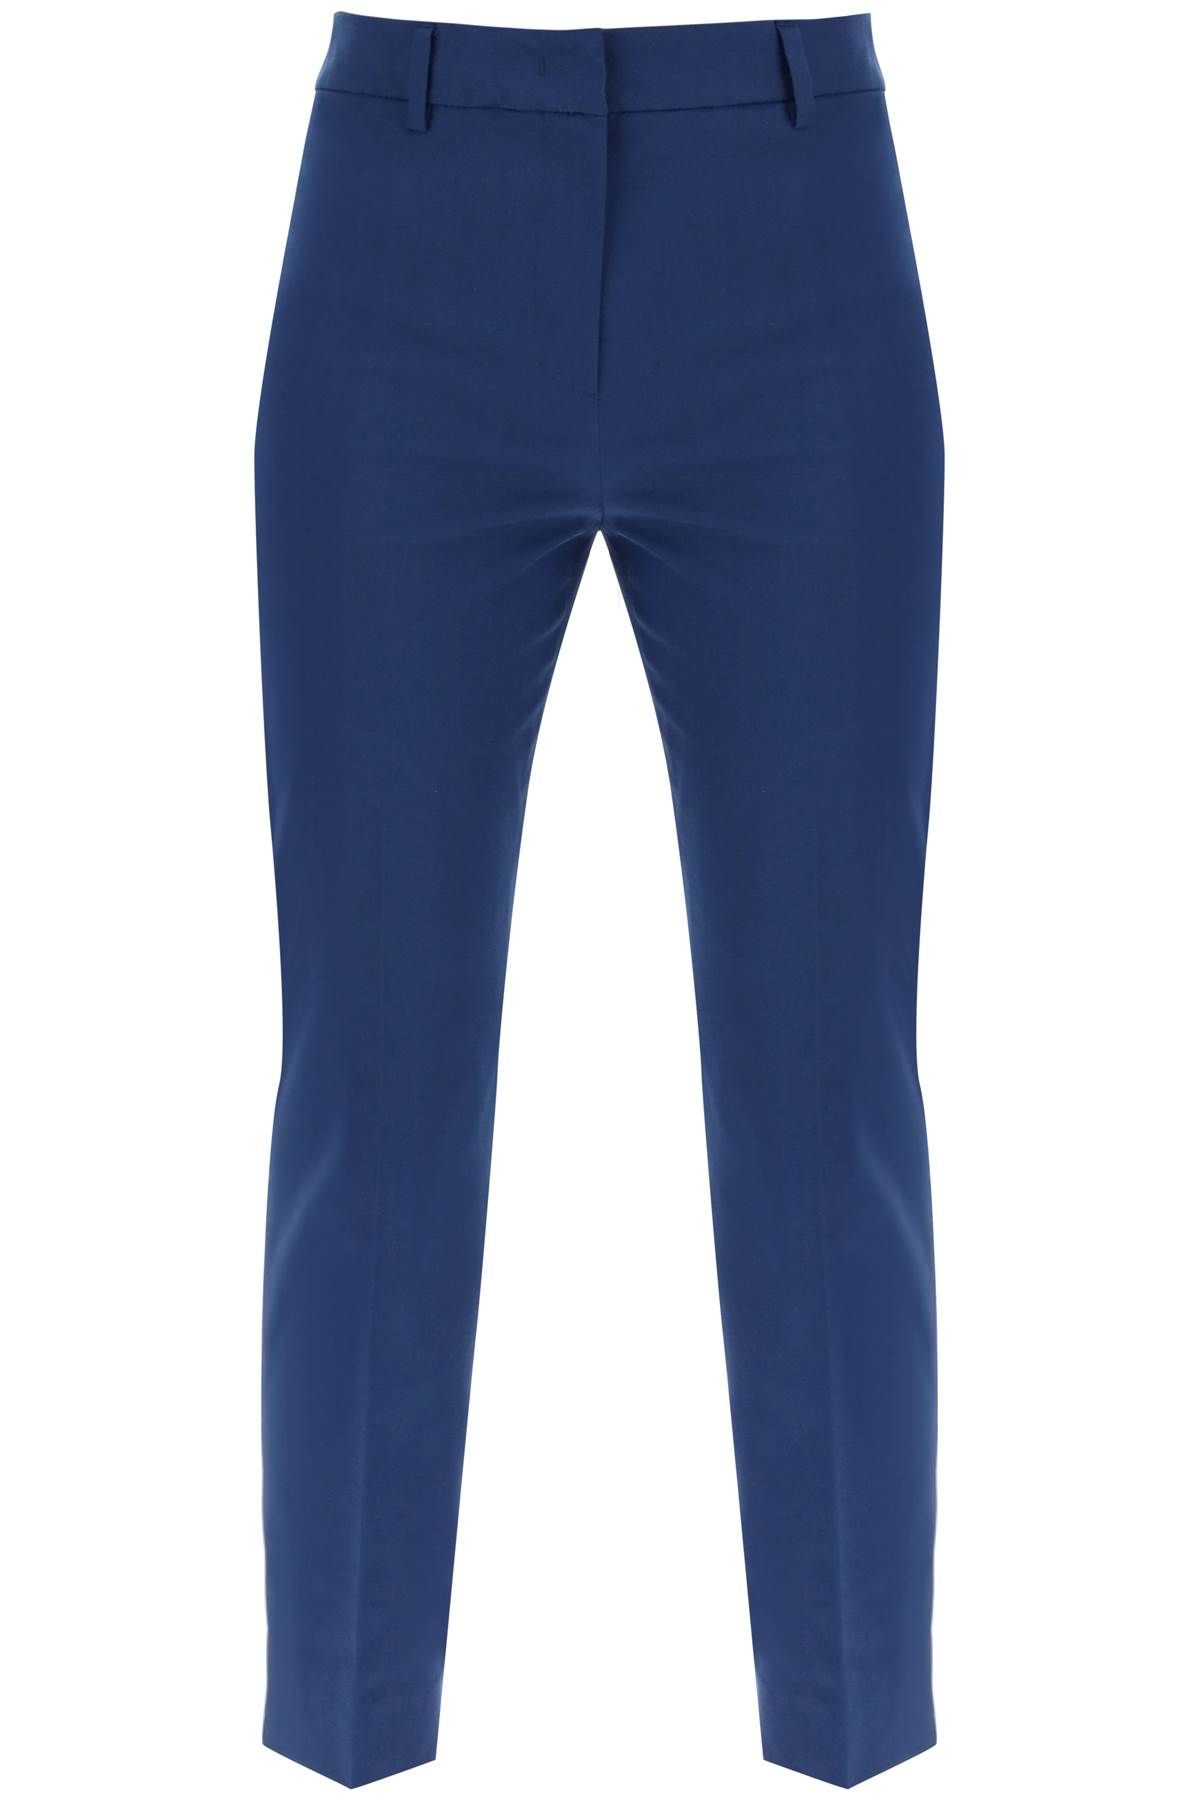 Weekend Max Mara Cecco Cotton Stretch Cigarette Pants In 10 In Blue